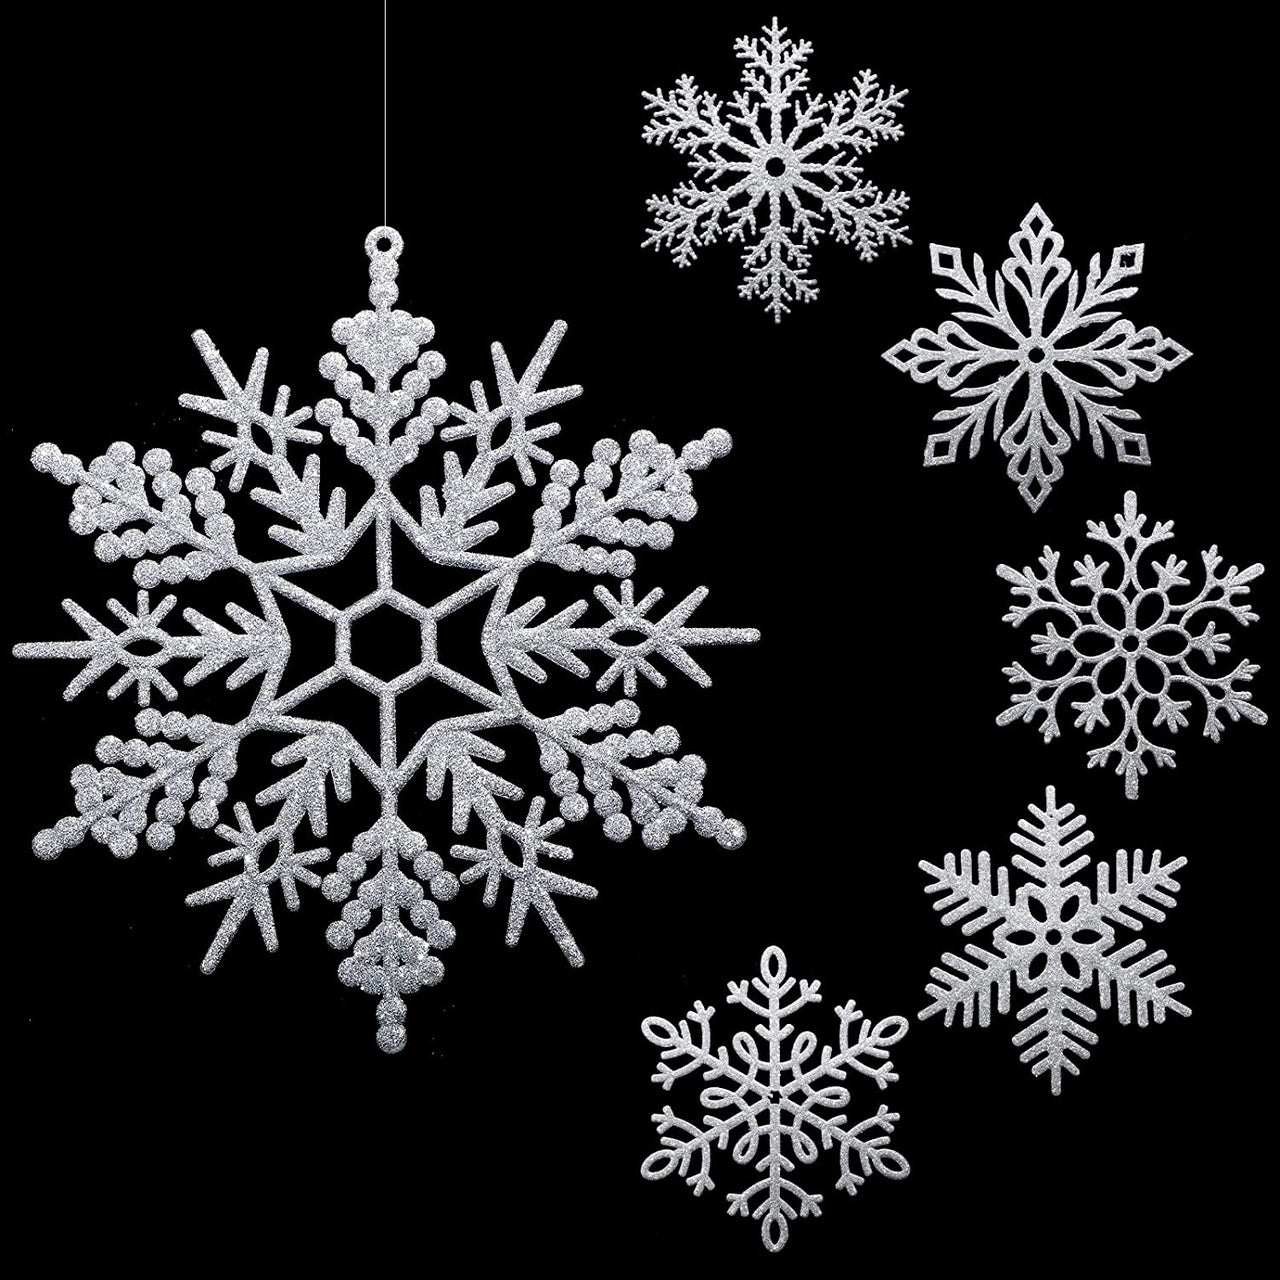 12 Pack Large Snowflakes Ornaments 12” Giant Glitter Decorative Hanging Snowflakes Plastic Oversized Christmas Snowflake Decorations with 164 Ft Nylon Thread for Indoor Outdoor Decor